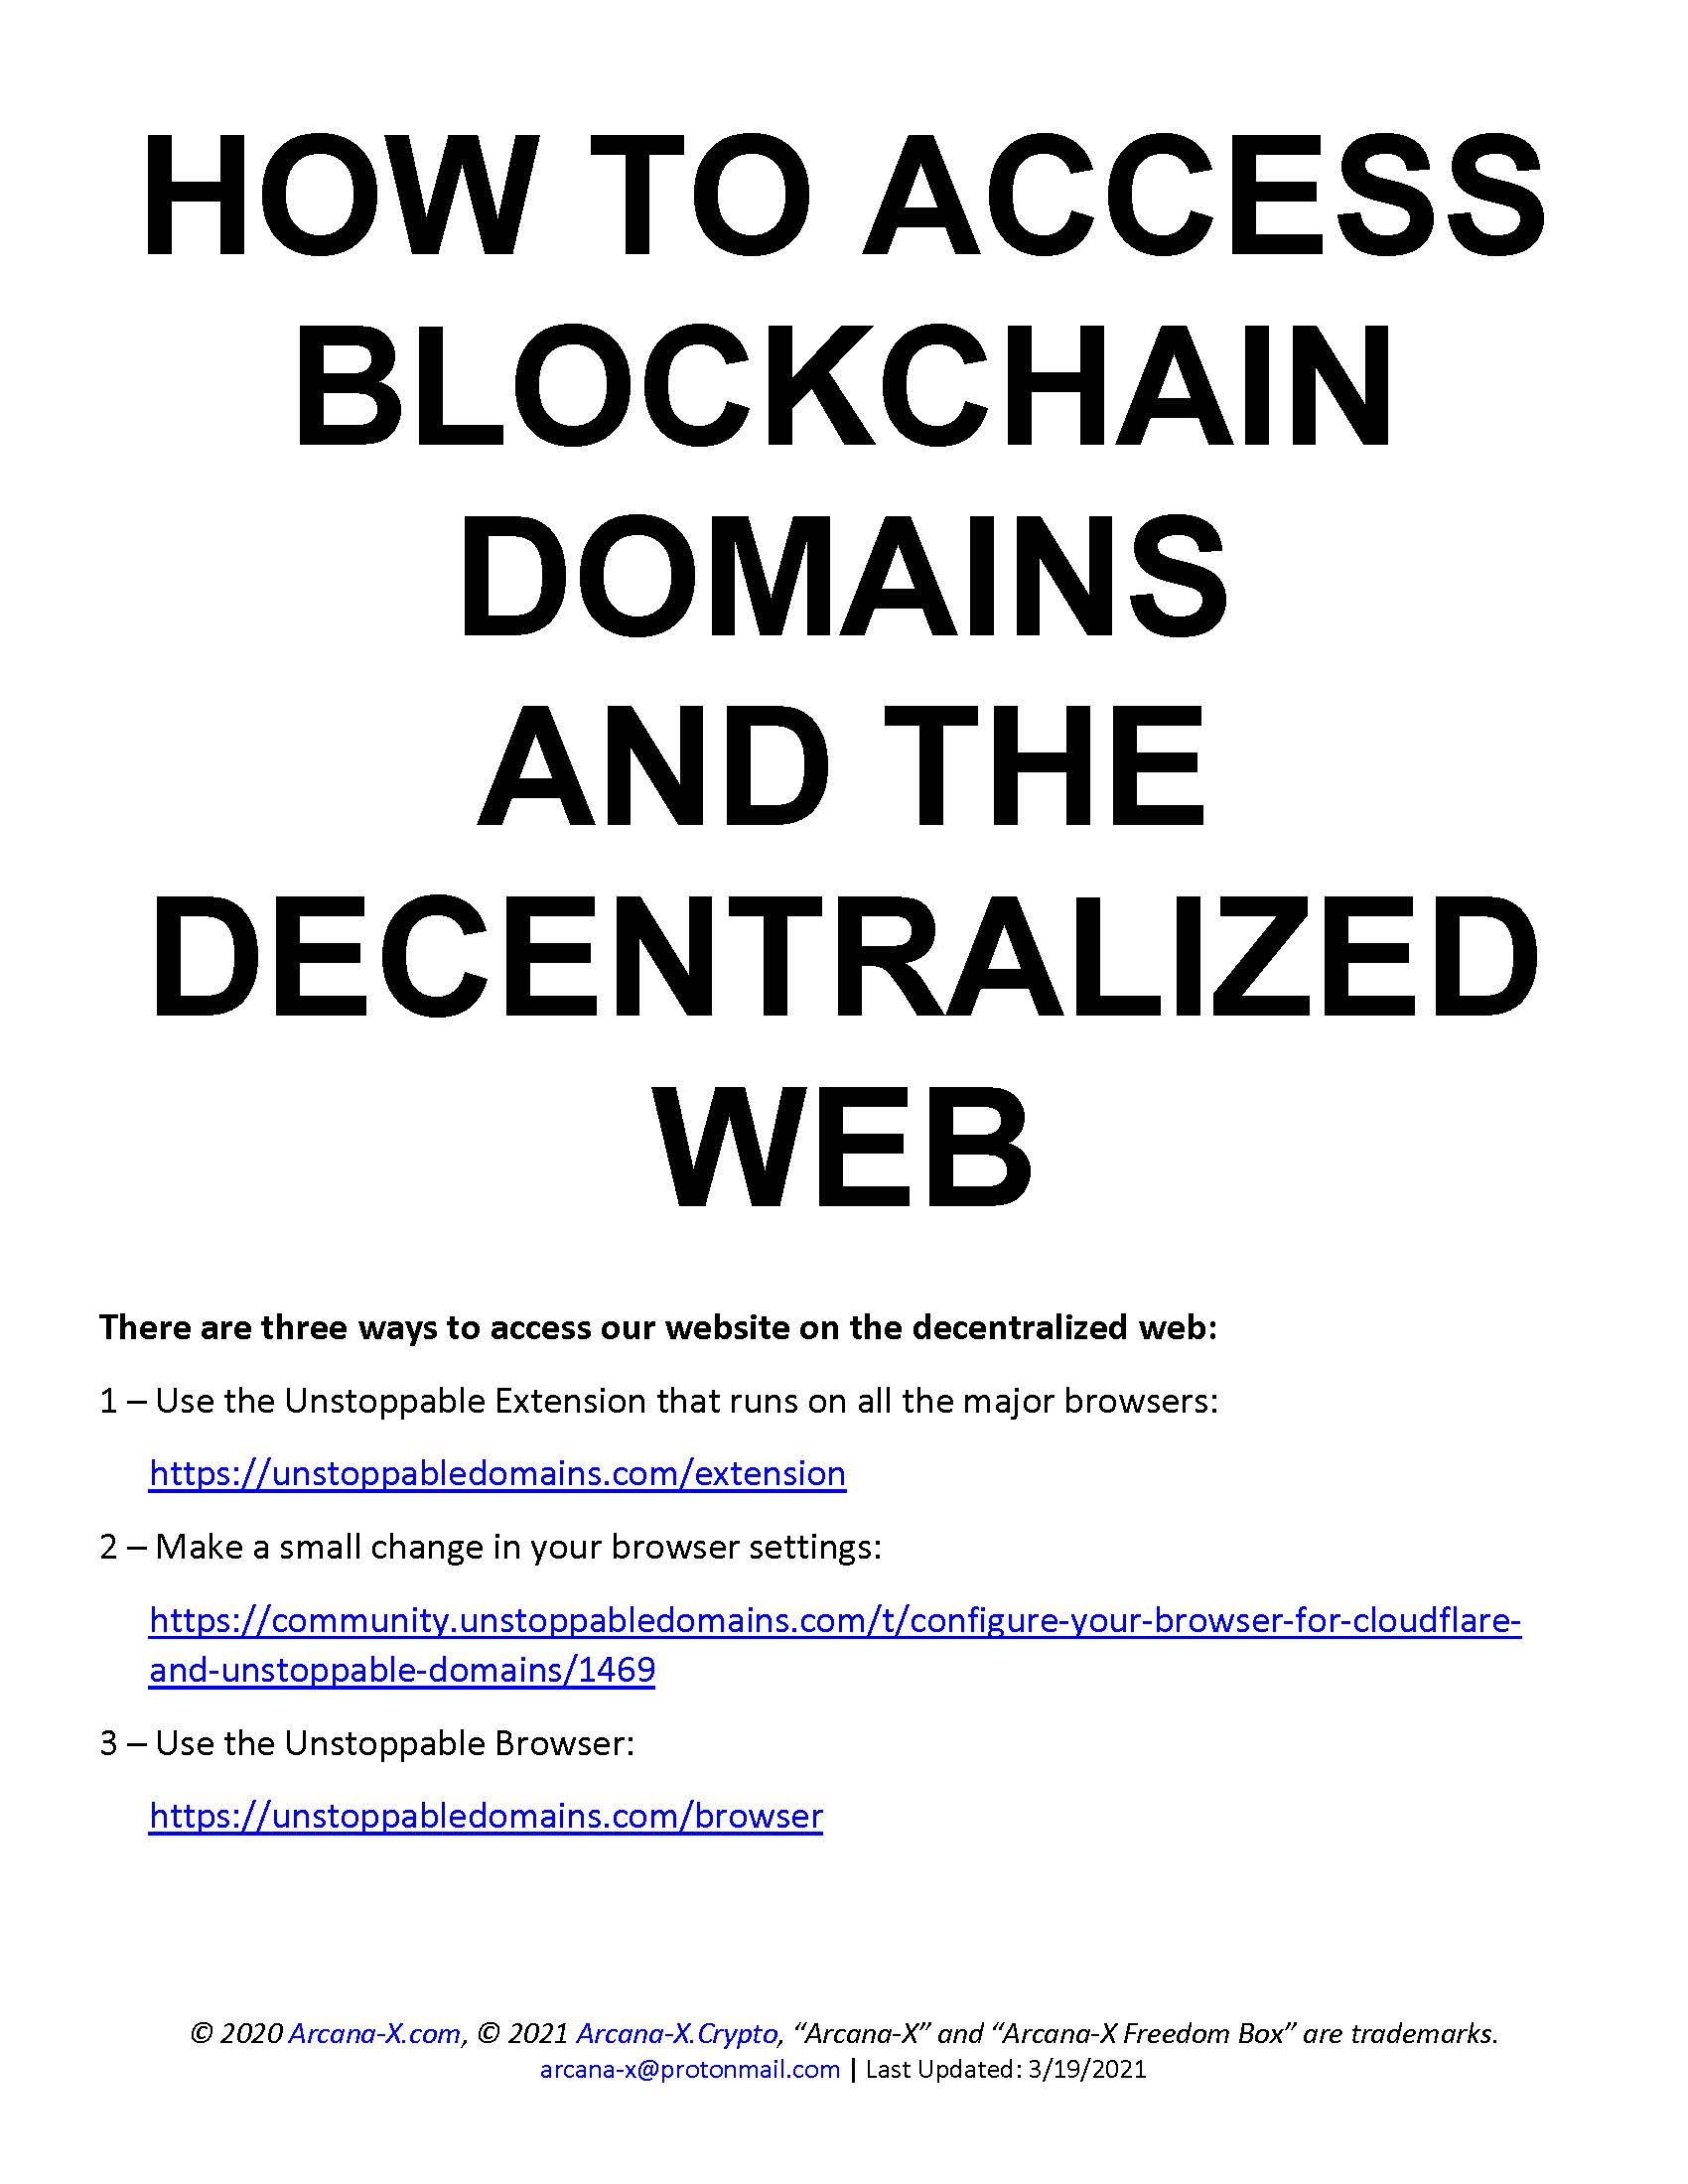 HOW TO ACCESS BLOCKCHAIN DOMAINS